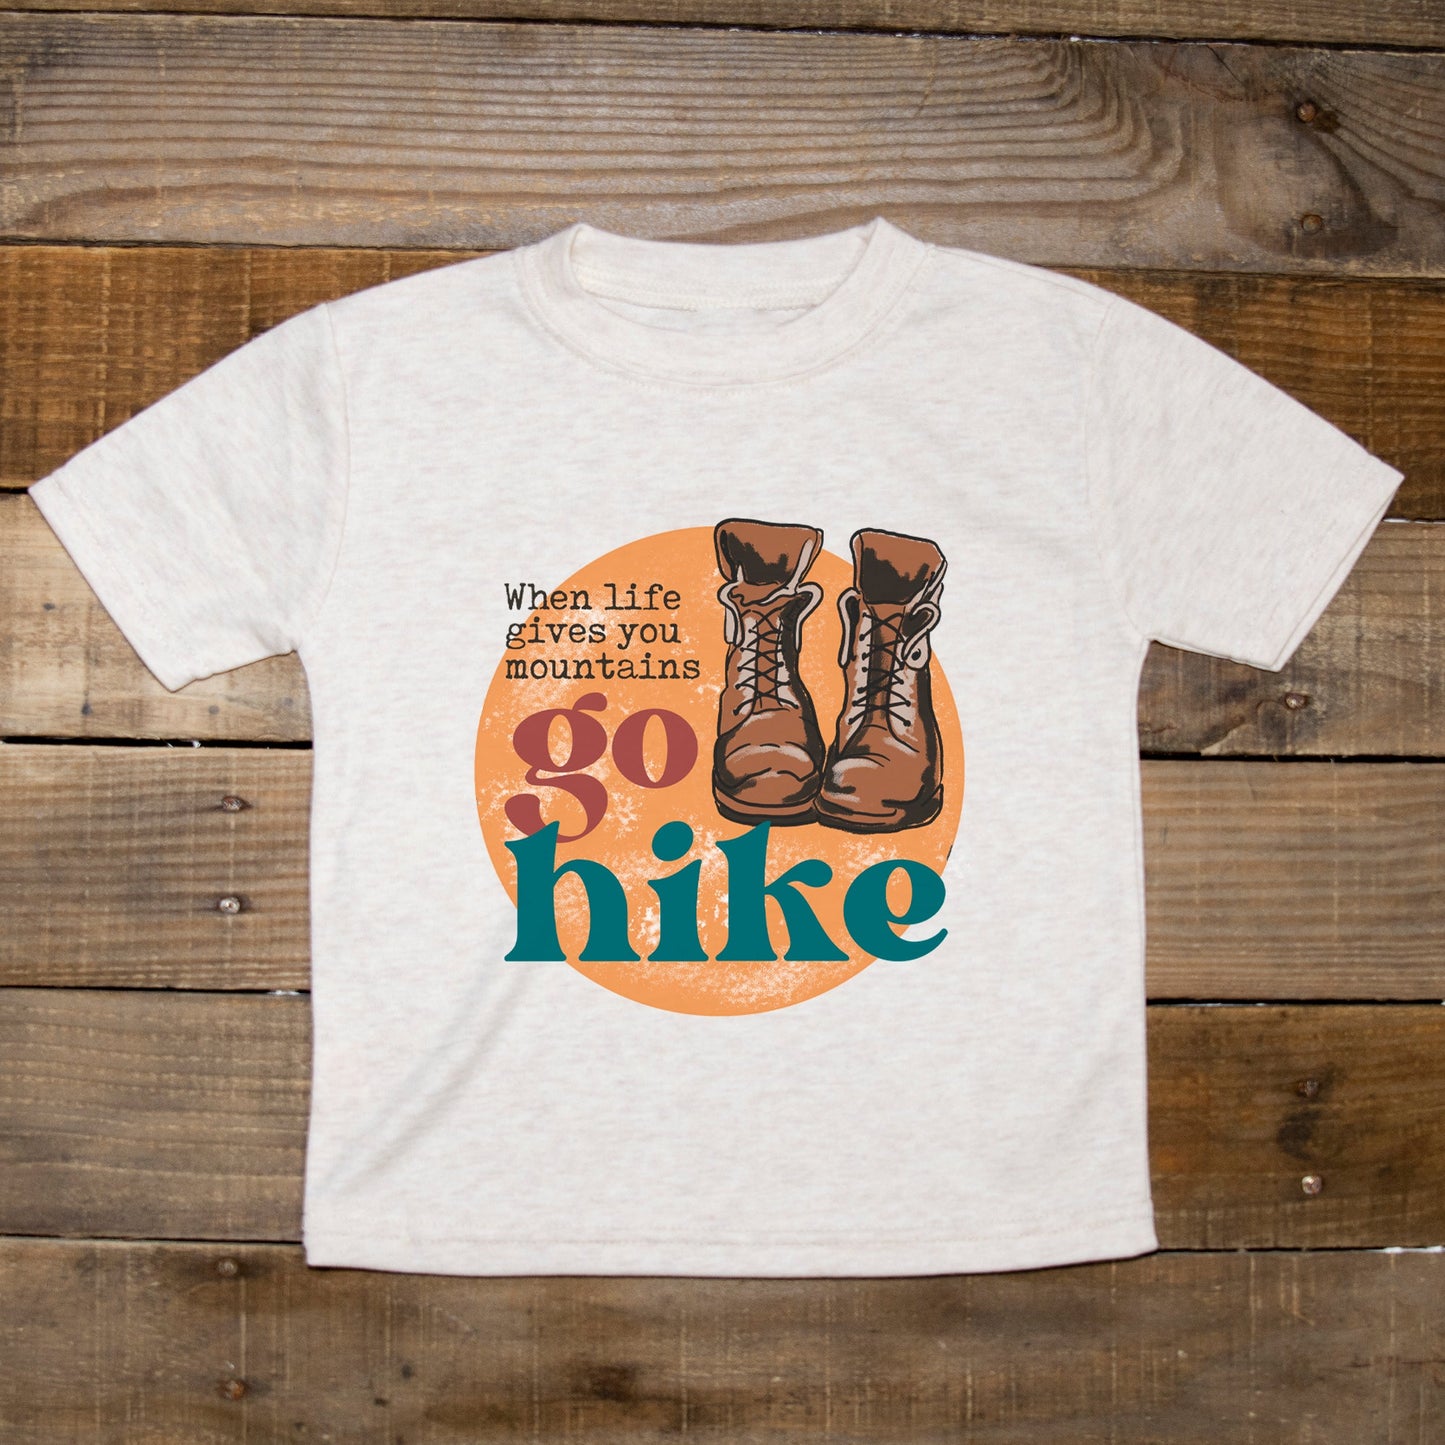 "When life gives you mountains go hike" Soft Beige Tee